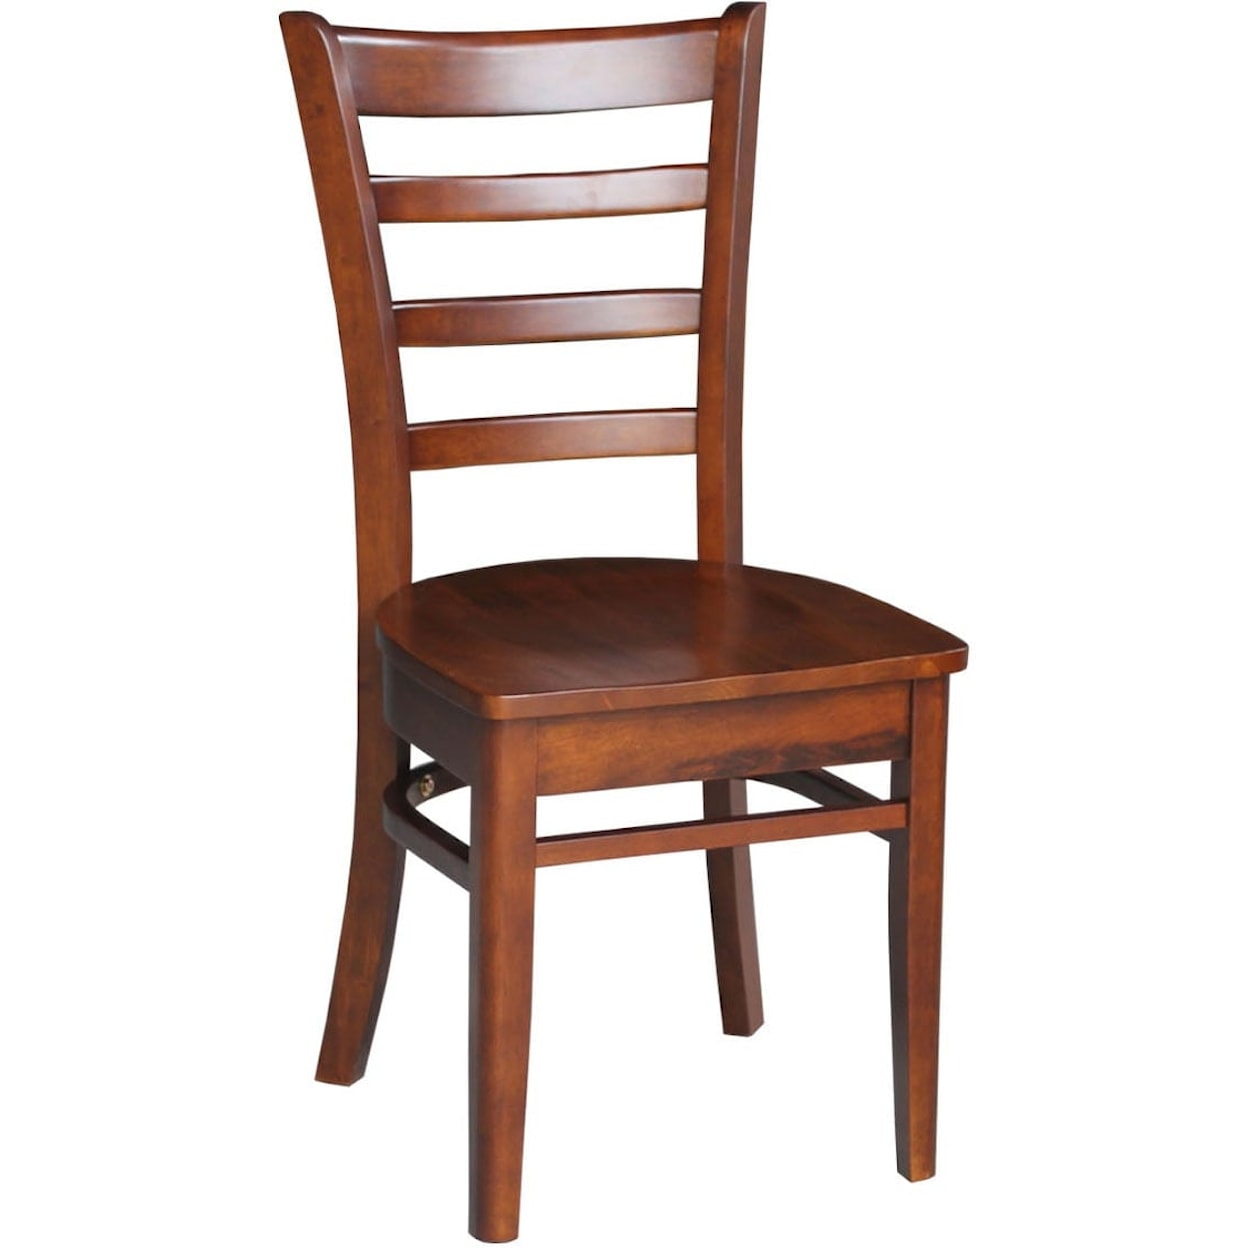 John Thomas Dining Essentials Emily Dining Chair in Expresso